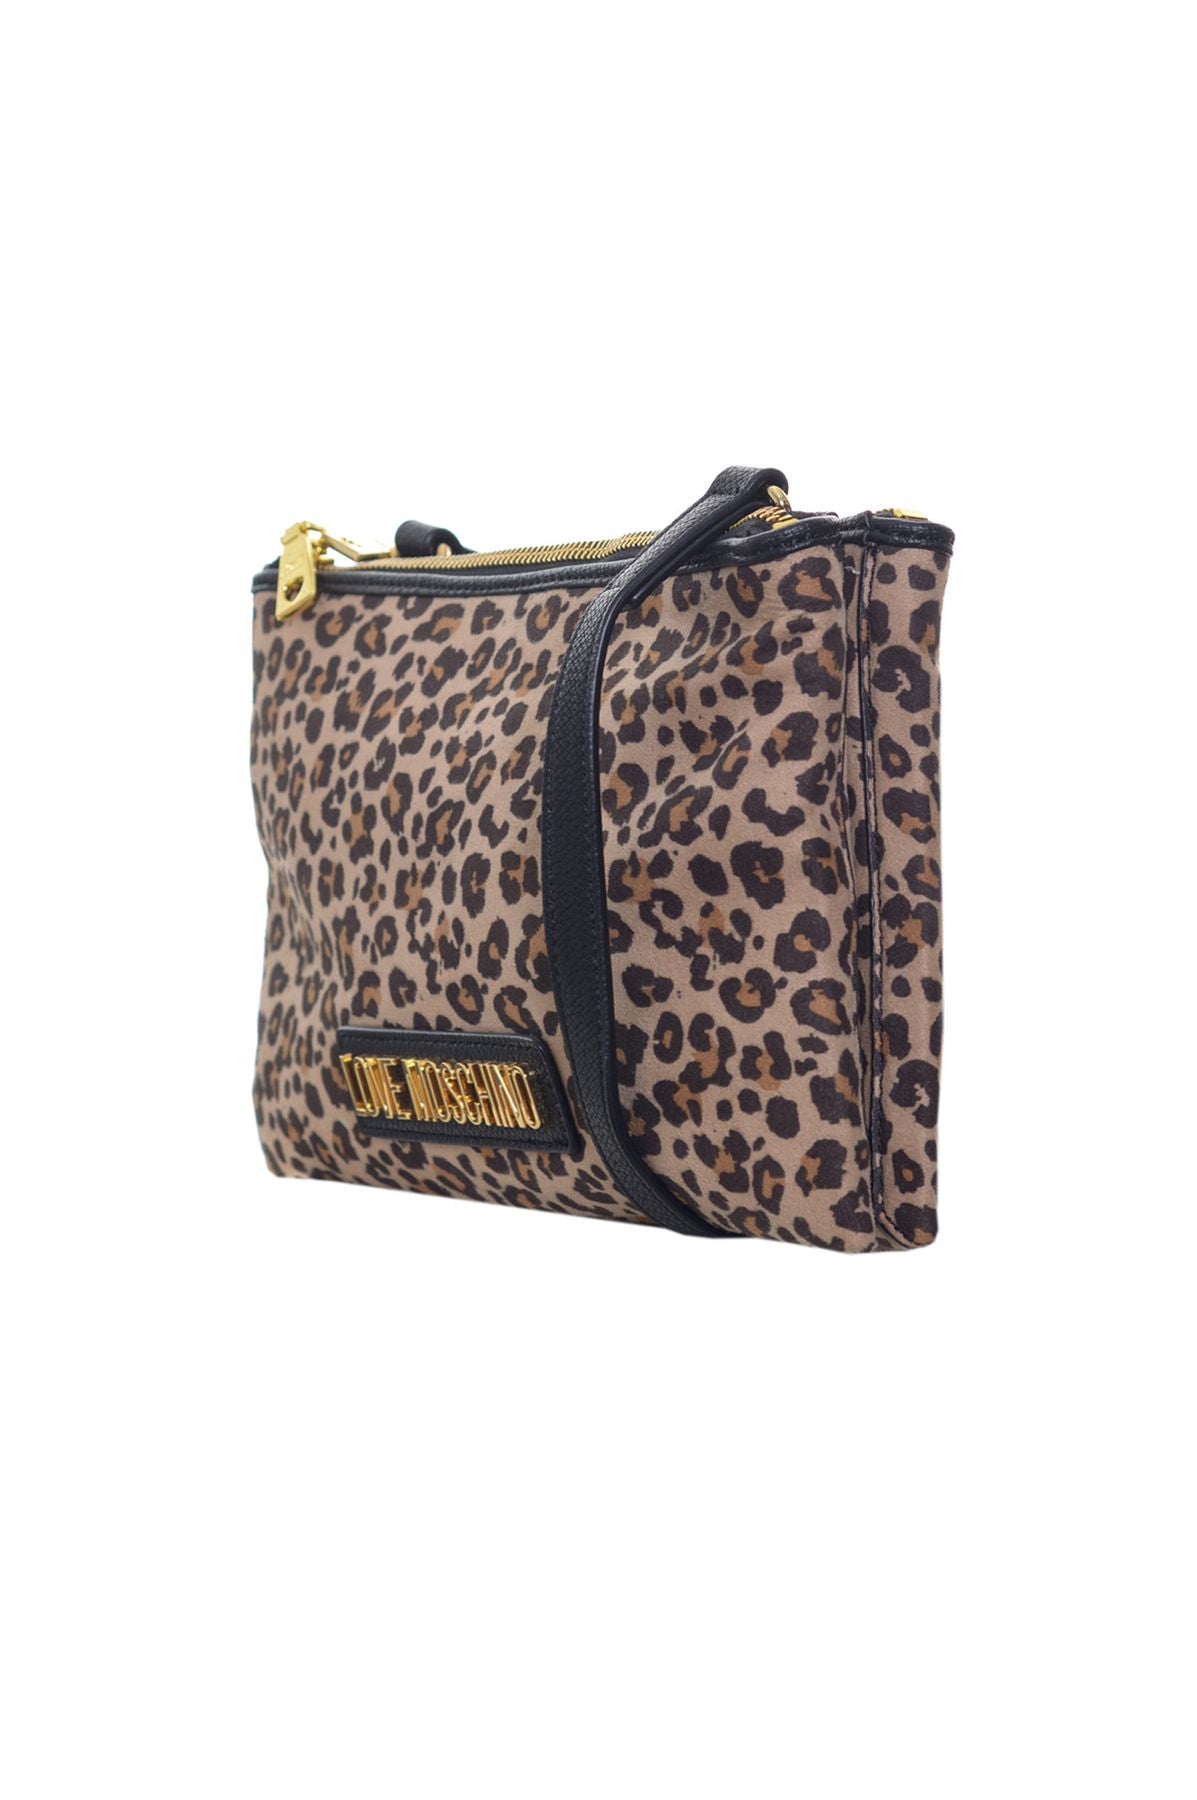 LOVE MOSCHINO Spring/Summer Polyester Bags